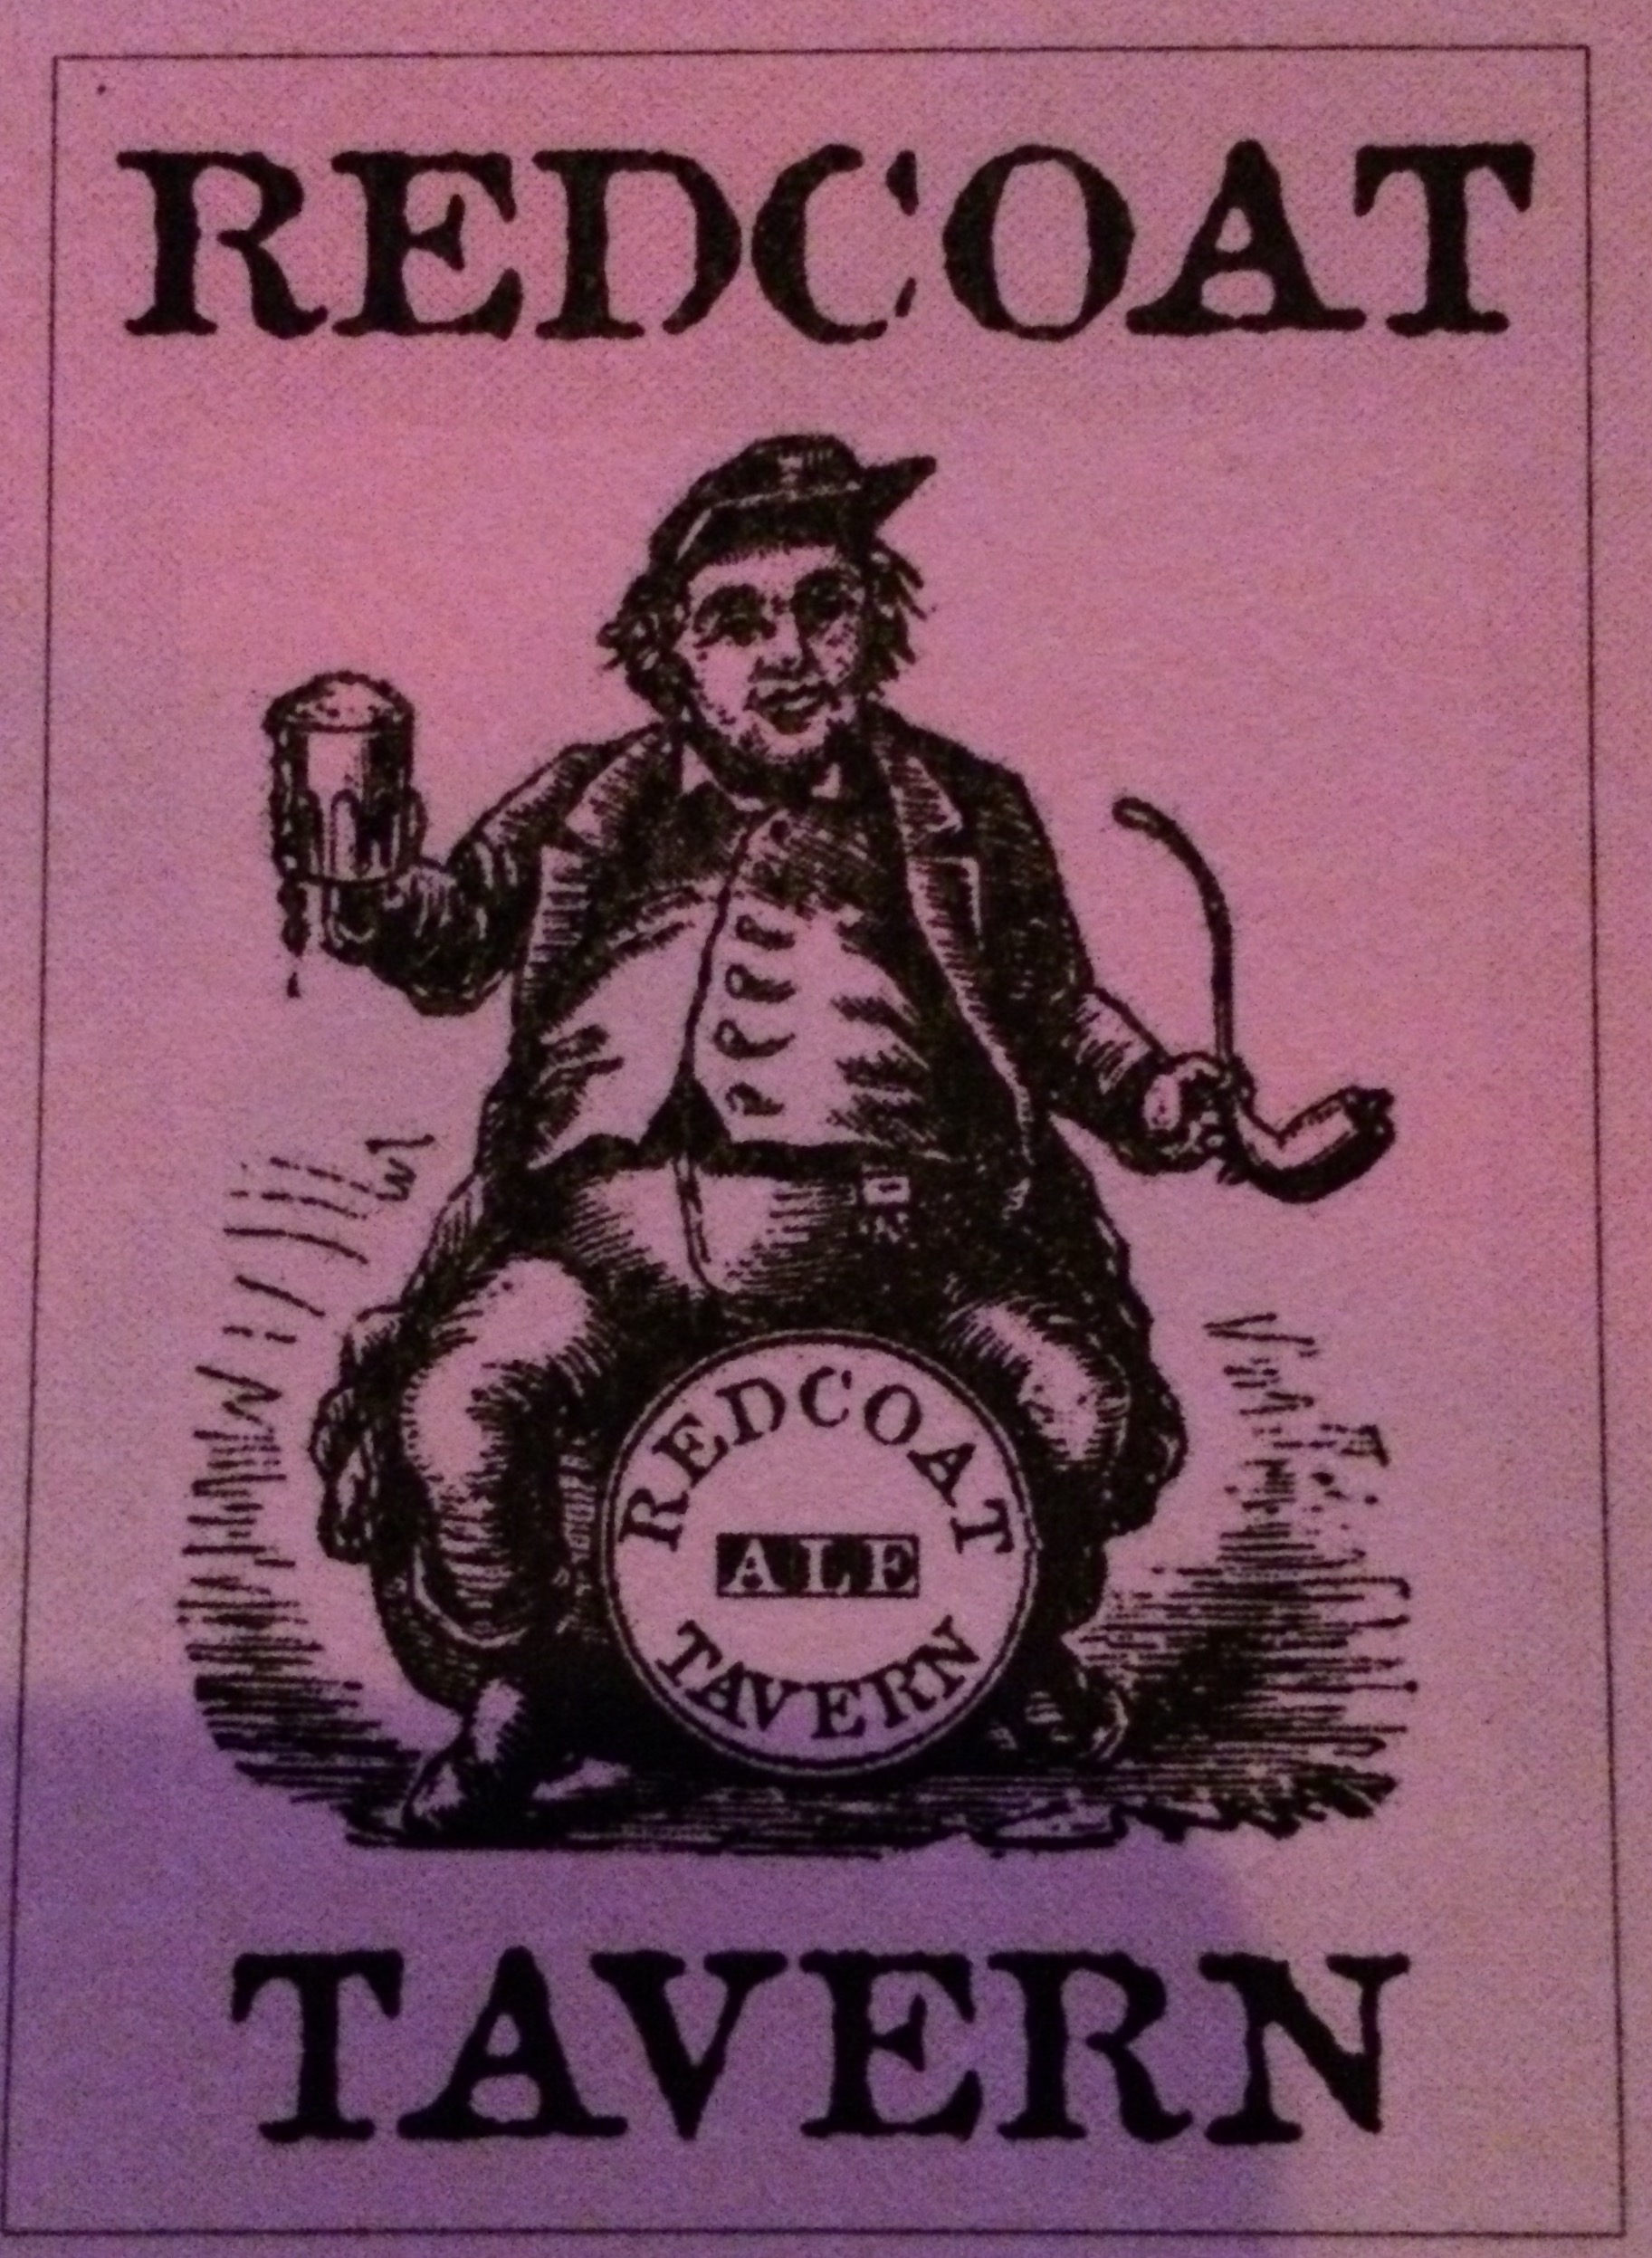 Redcoat Tavern's logo. Carl very much wanted a box of wooden matches with this logo on it, but said he would settle for a matchbook. Redcoat Tavern didn't have ANY matches.